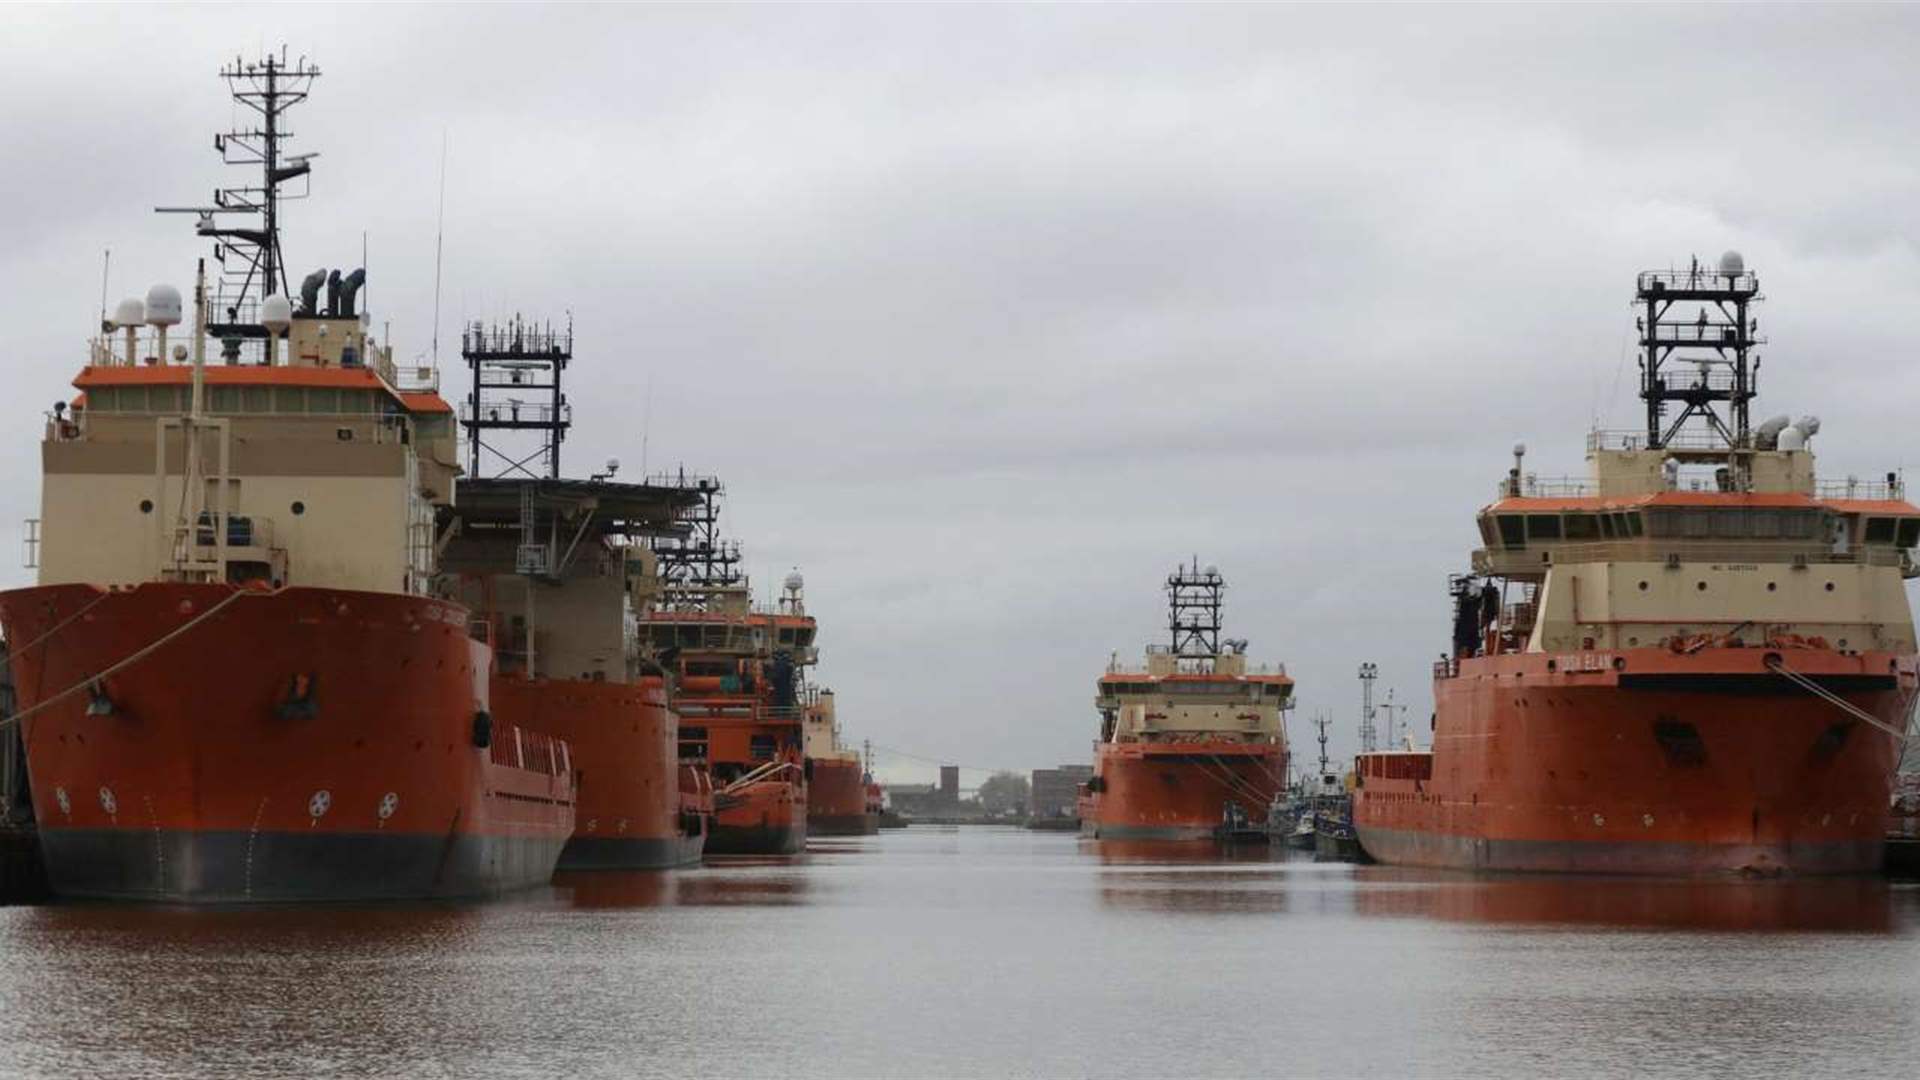 London is in the process of issuing &quot;hundreds&quot; of North Sea gas and oil licences